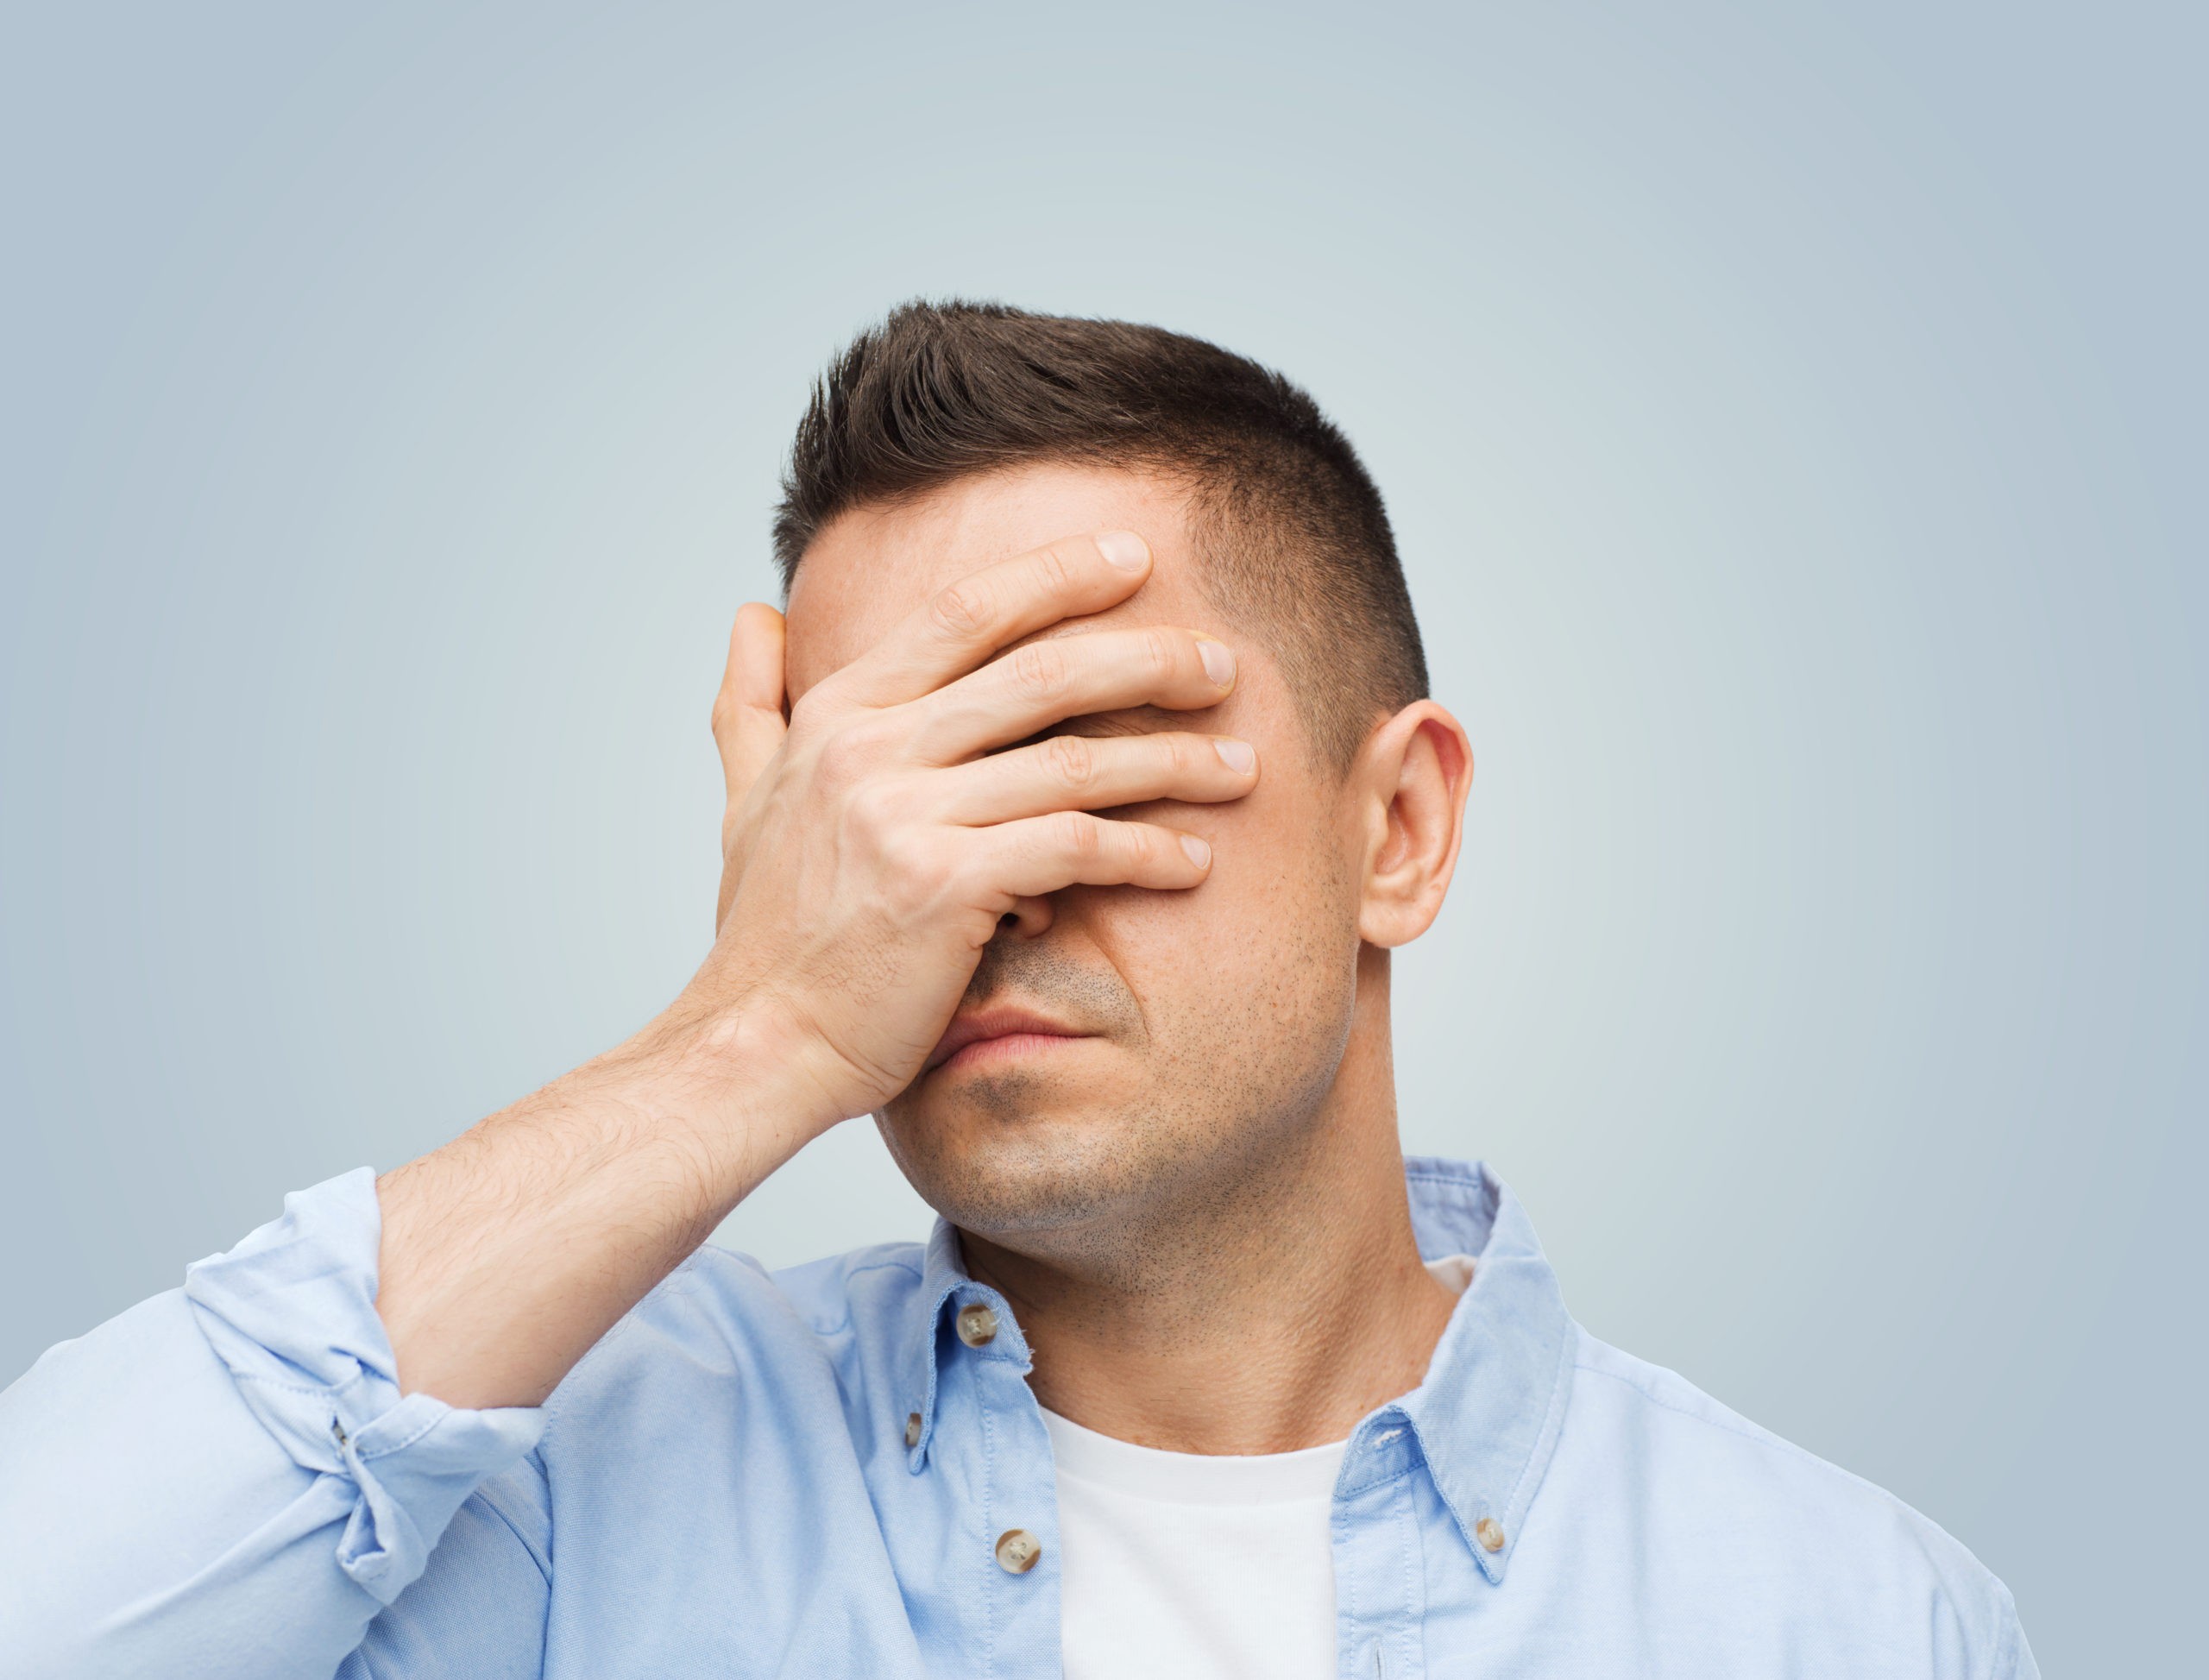 Insane media relations is doing the same thing over and over again and expecting the same results - even if it is not working. Face palm image used in blog post by Good Business Consulting, PR firm in Sydney.